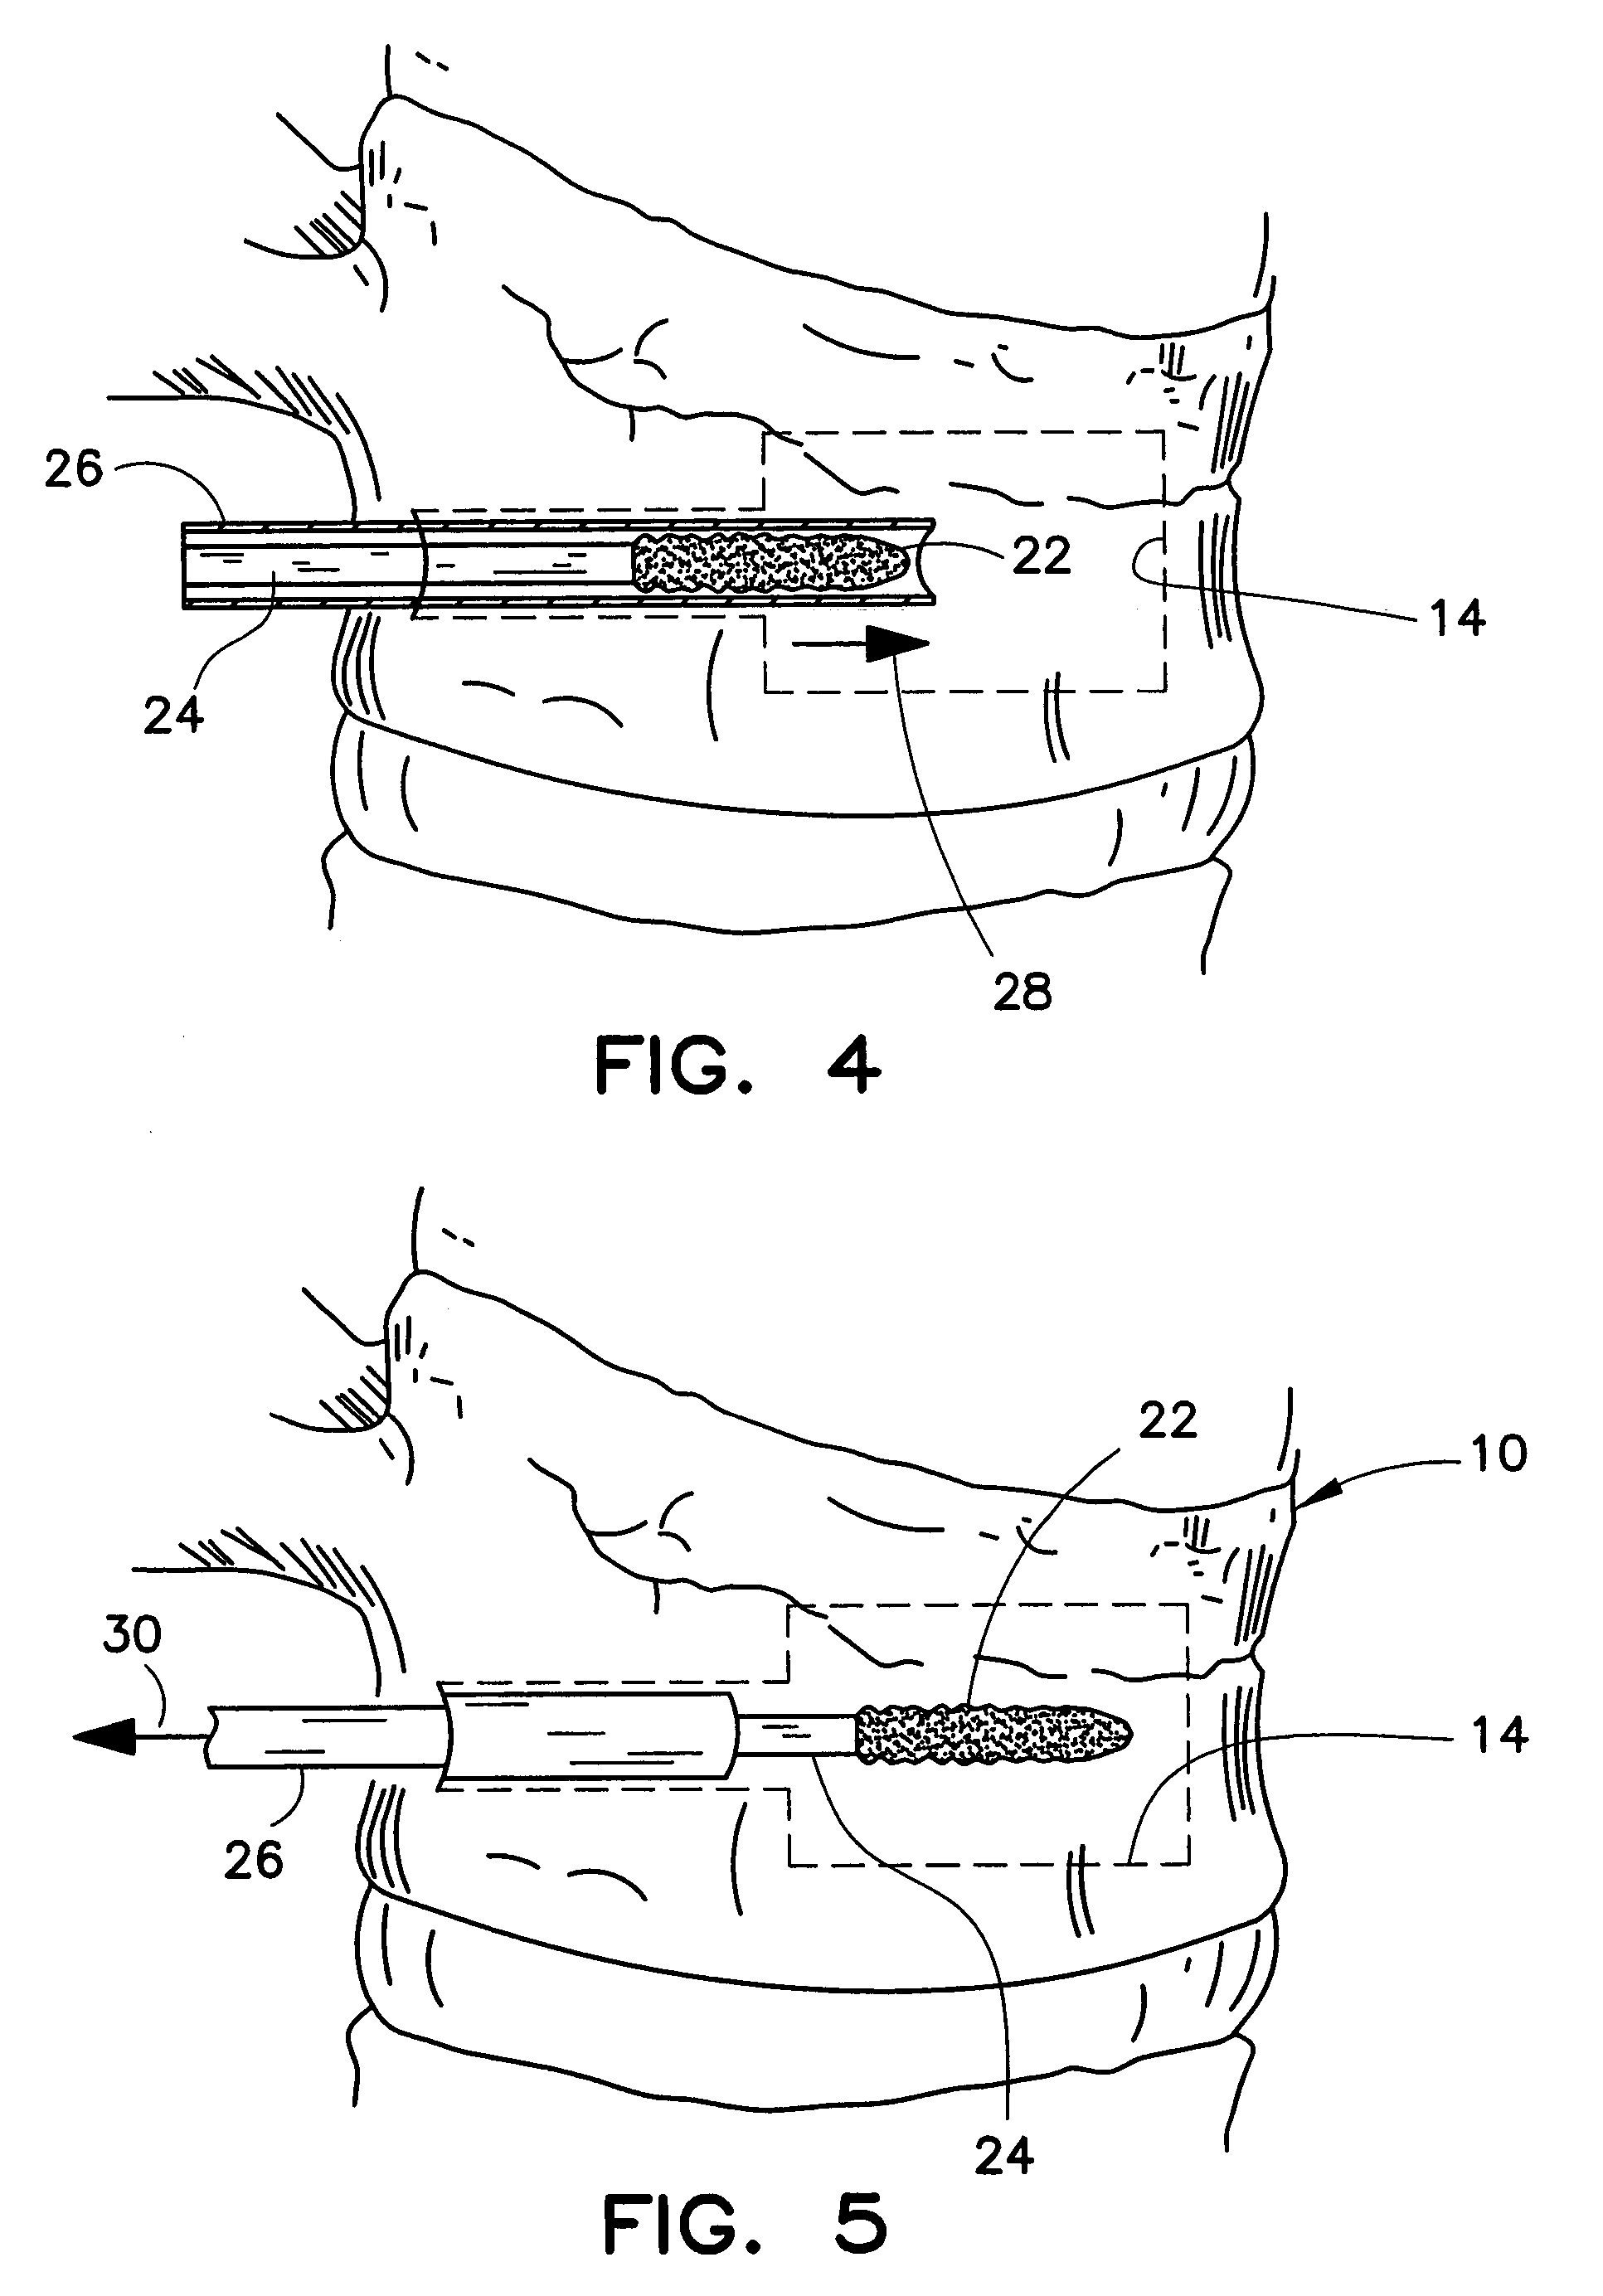 Method and apparatus for treating a vertebral body